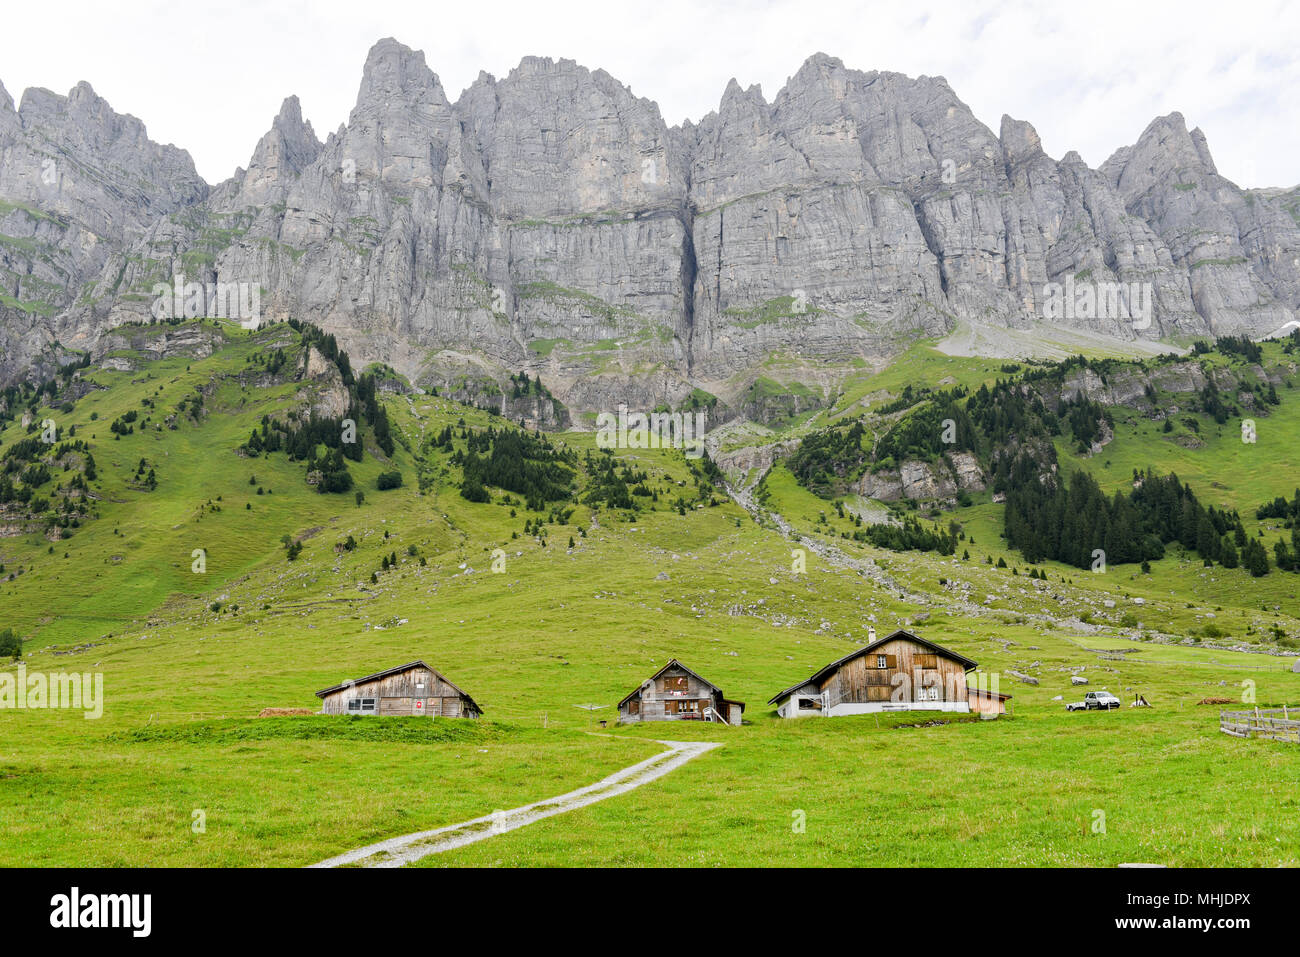 The rural village of Urnerboden on the Swiss alps Stock Photo